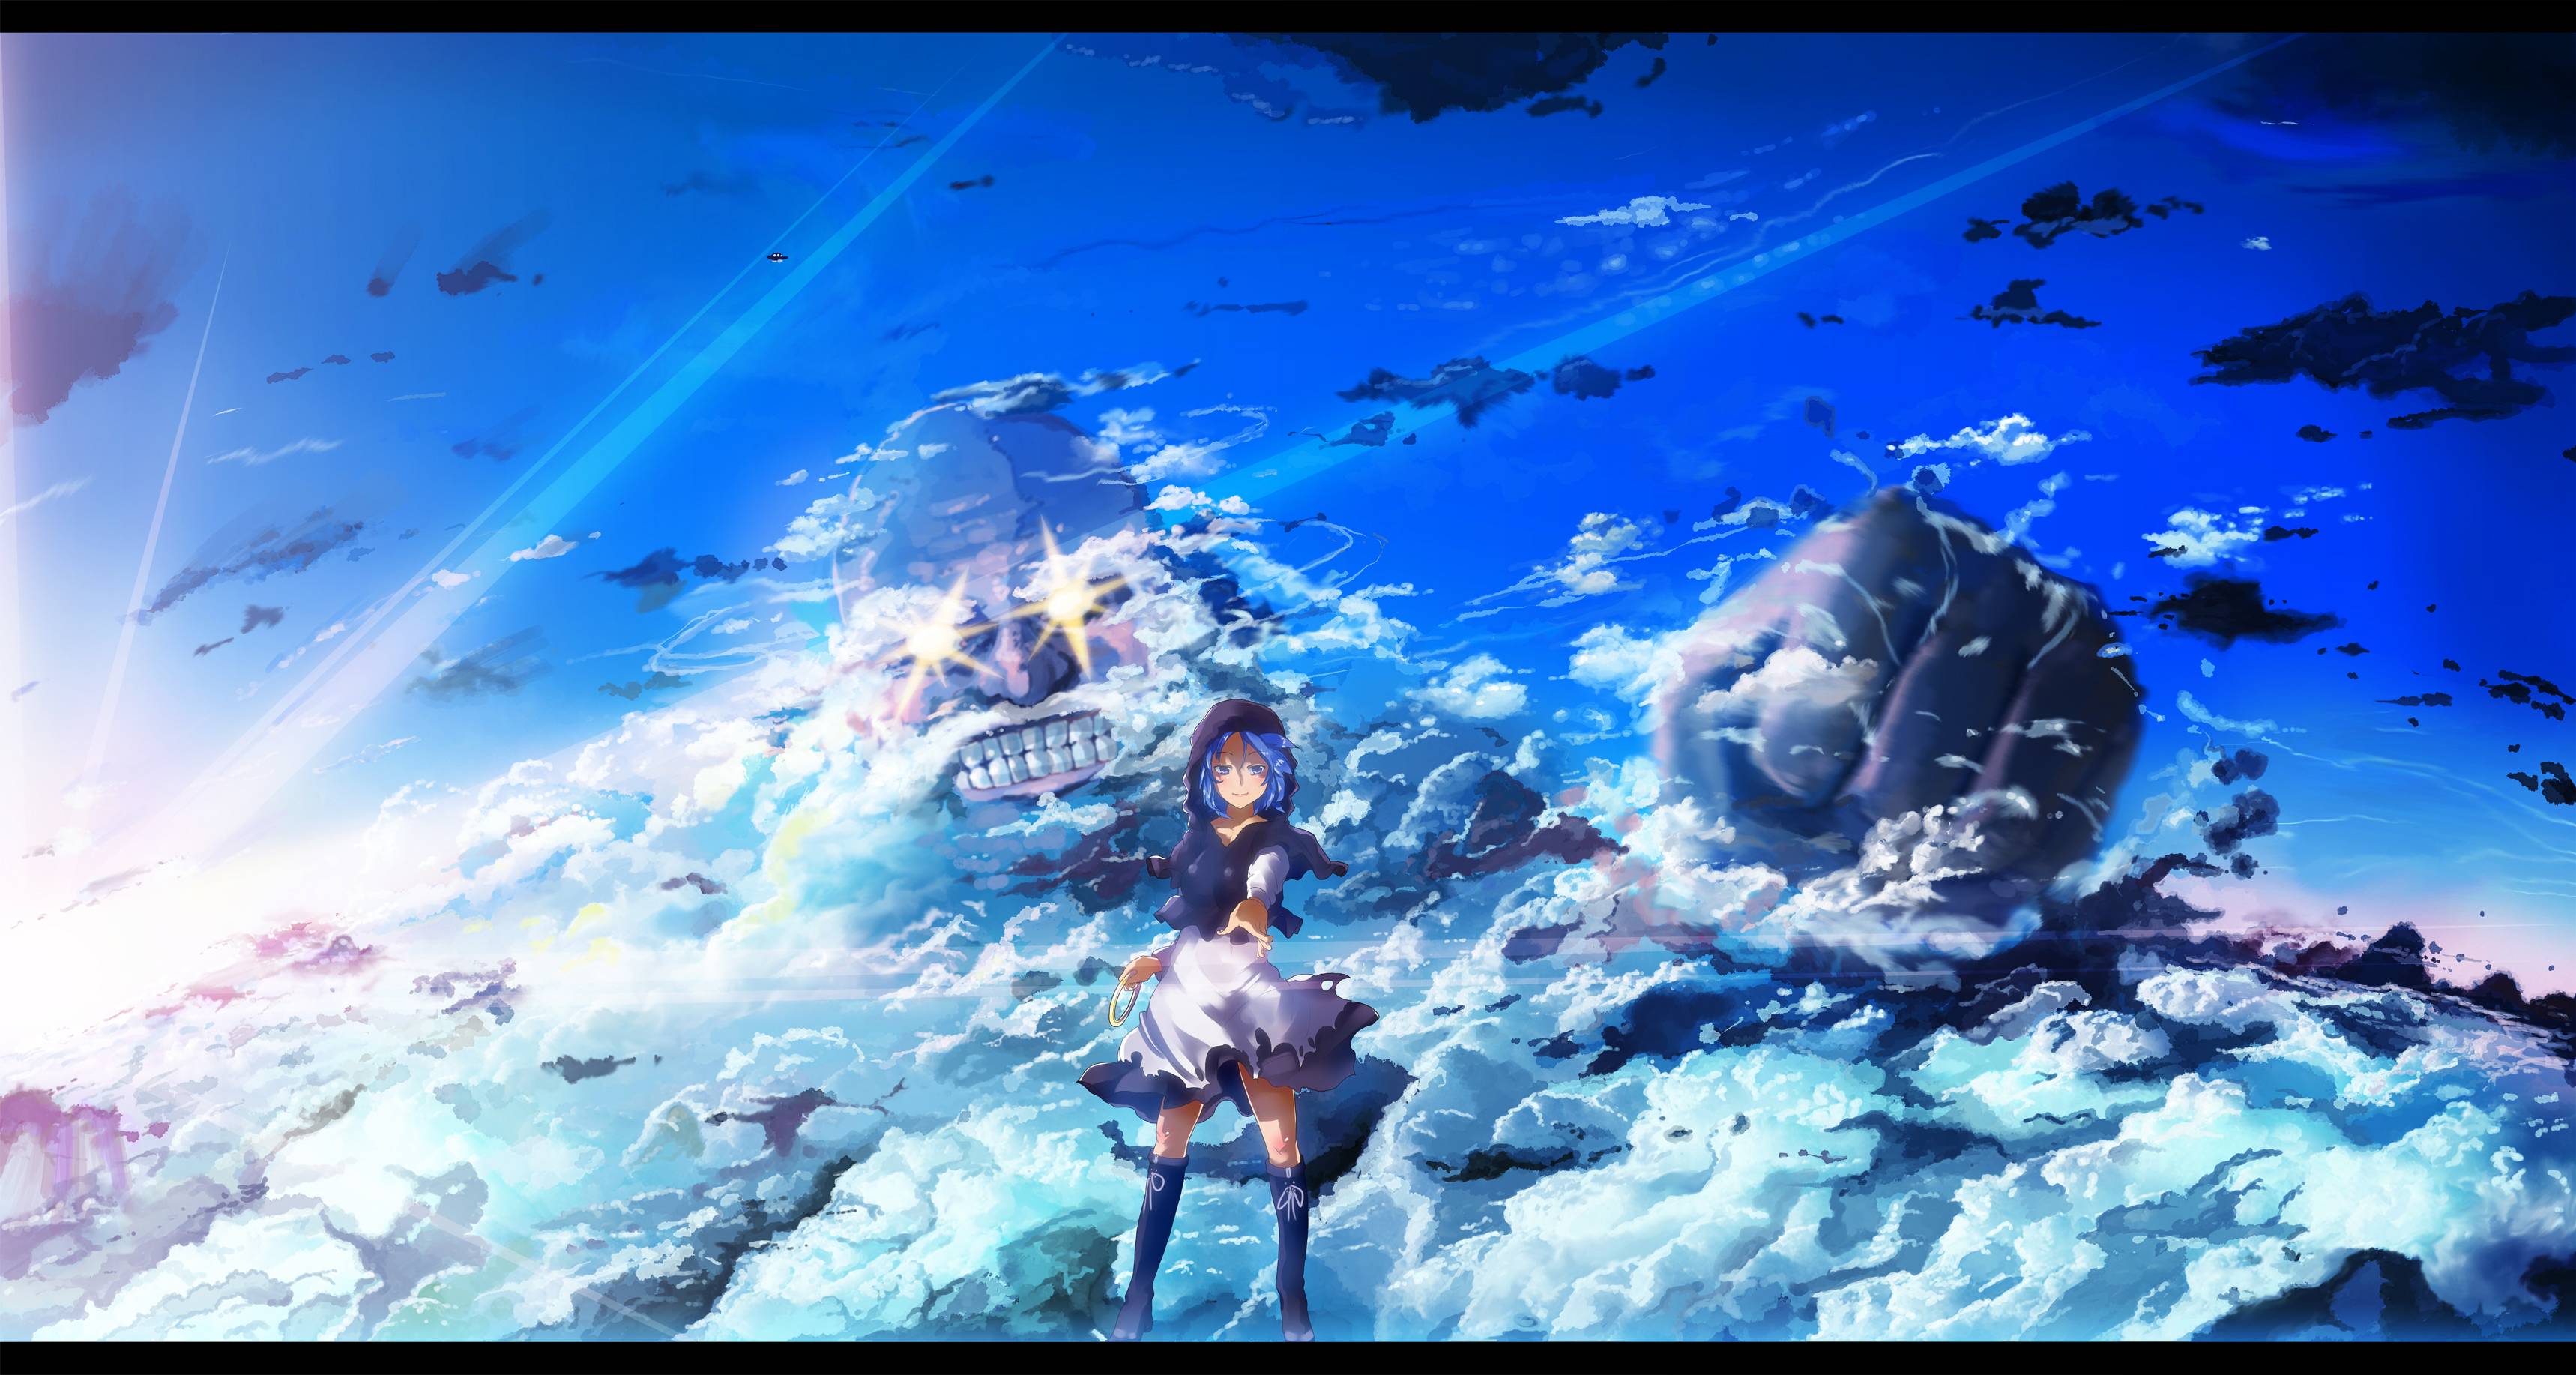 The Image of Blue Clouds Touhou Anime Skyscapes Kumoi Ichirin